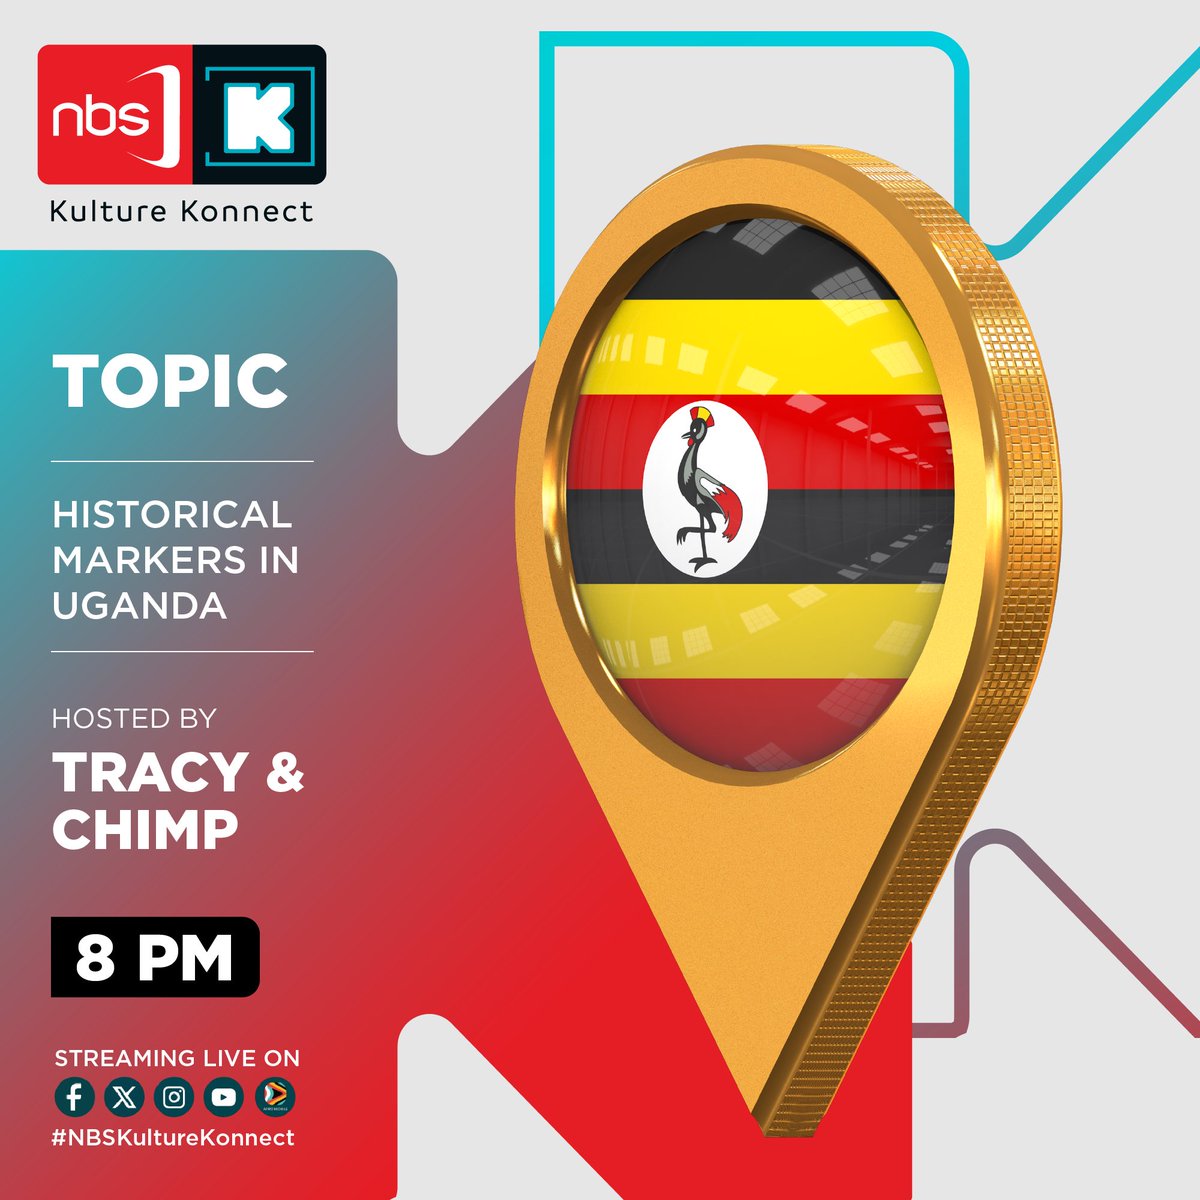 Tonight we find out more about the historical markers in Uganda. Do you know any? #NBSKultureKonnect #NextKulture